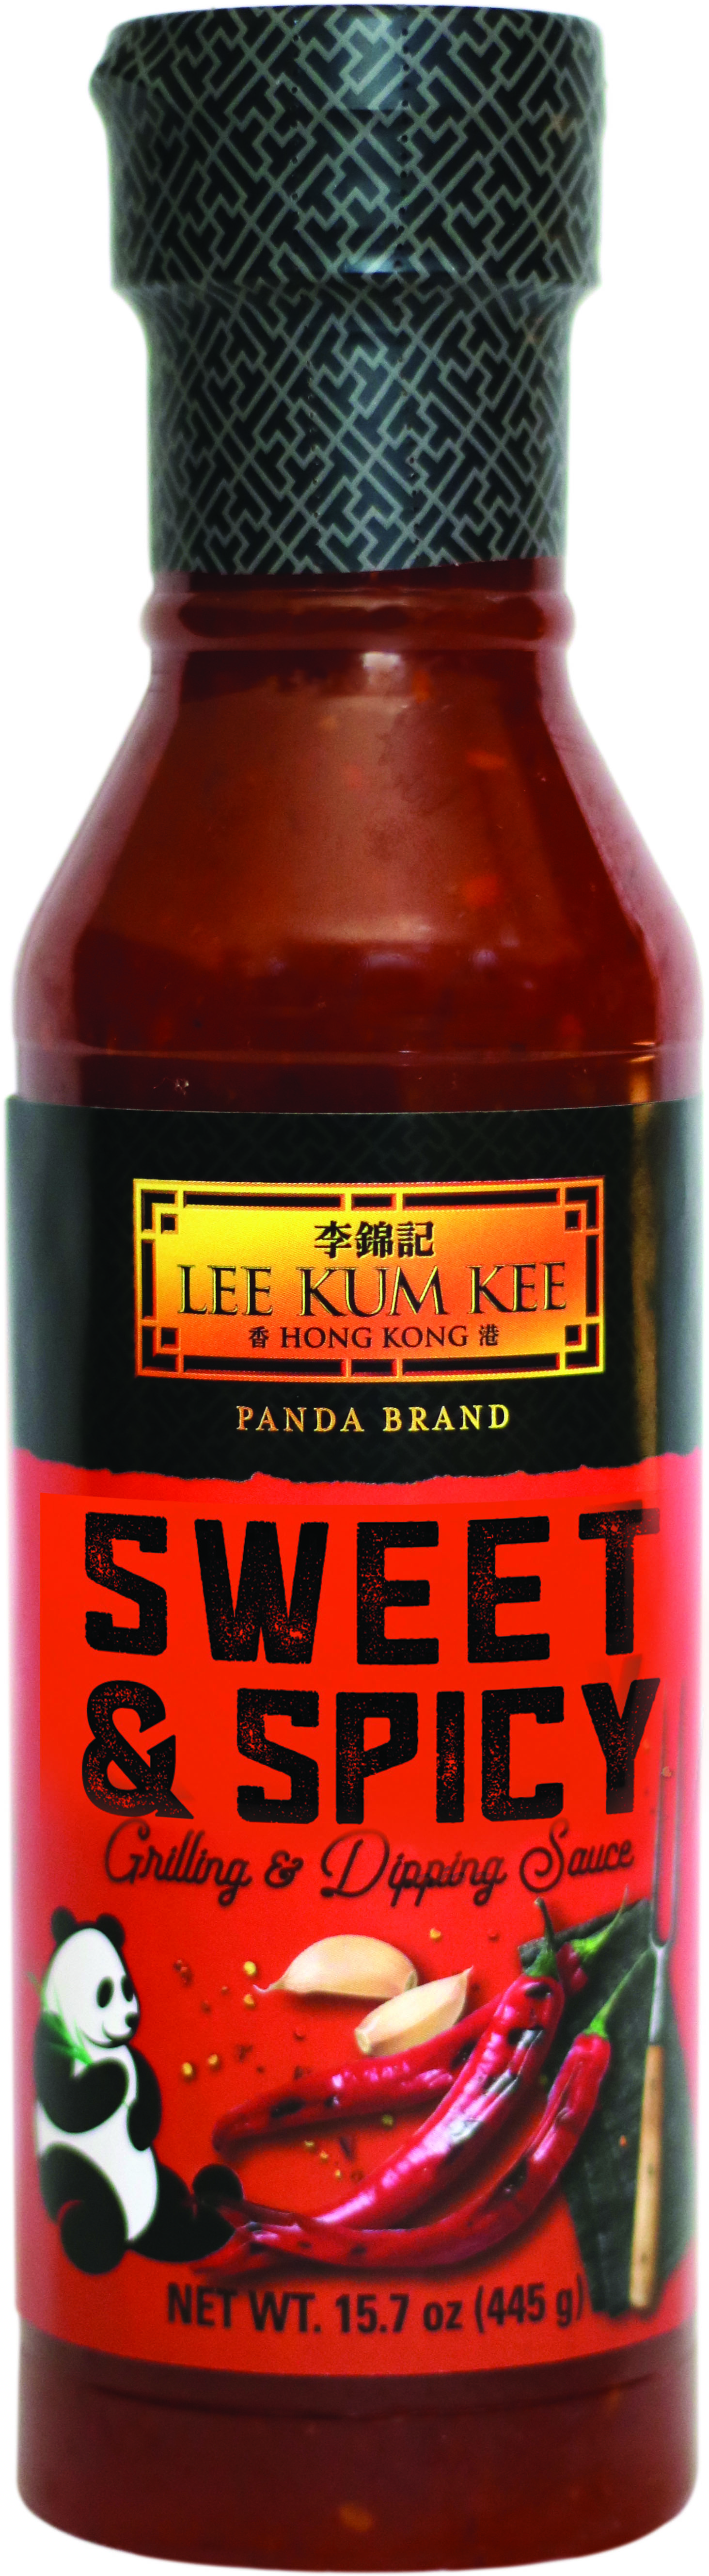 Panda Brand Sweet & Spicy Grilling & Dipping Sauce - 15.7 oz